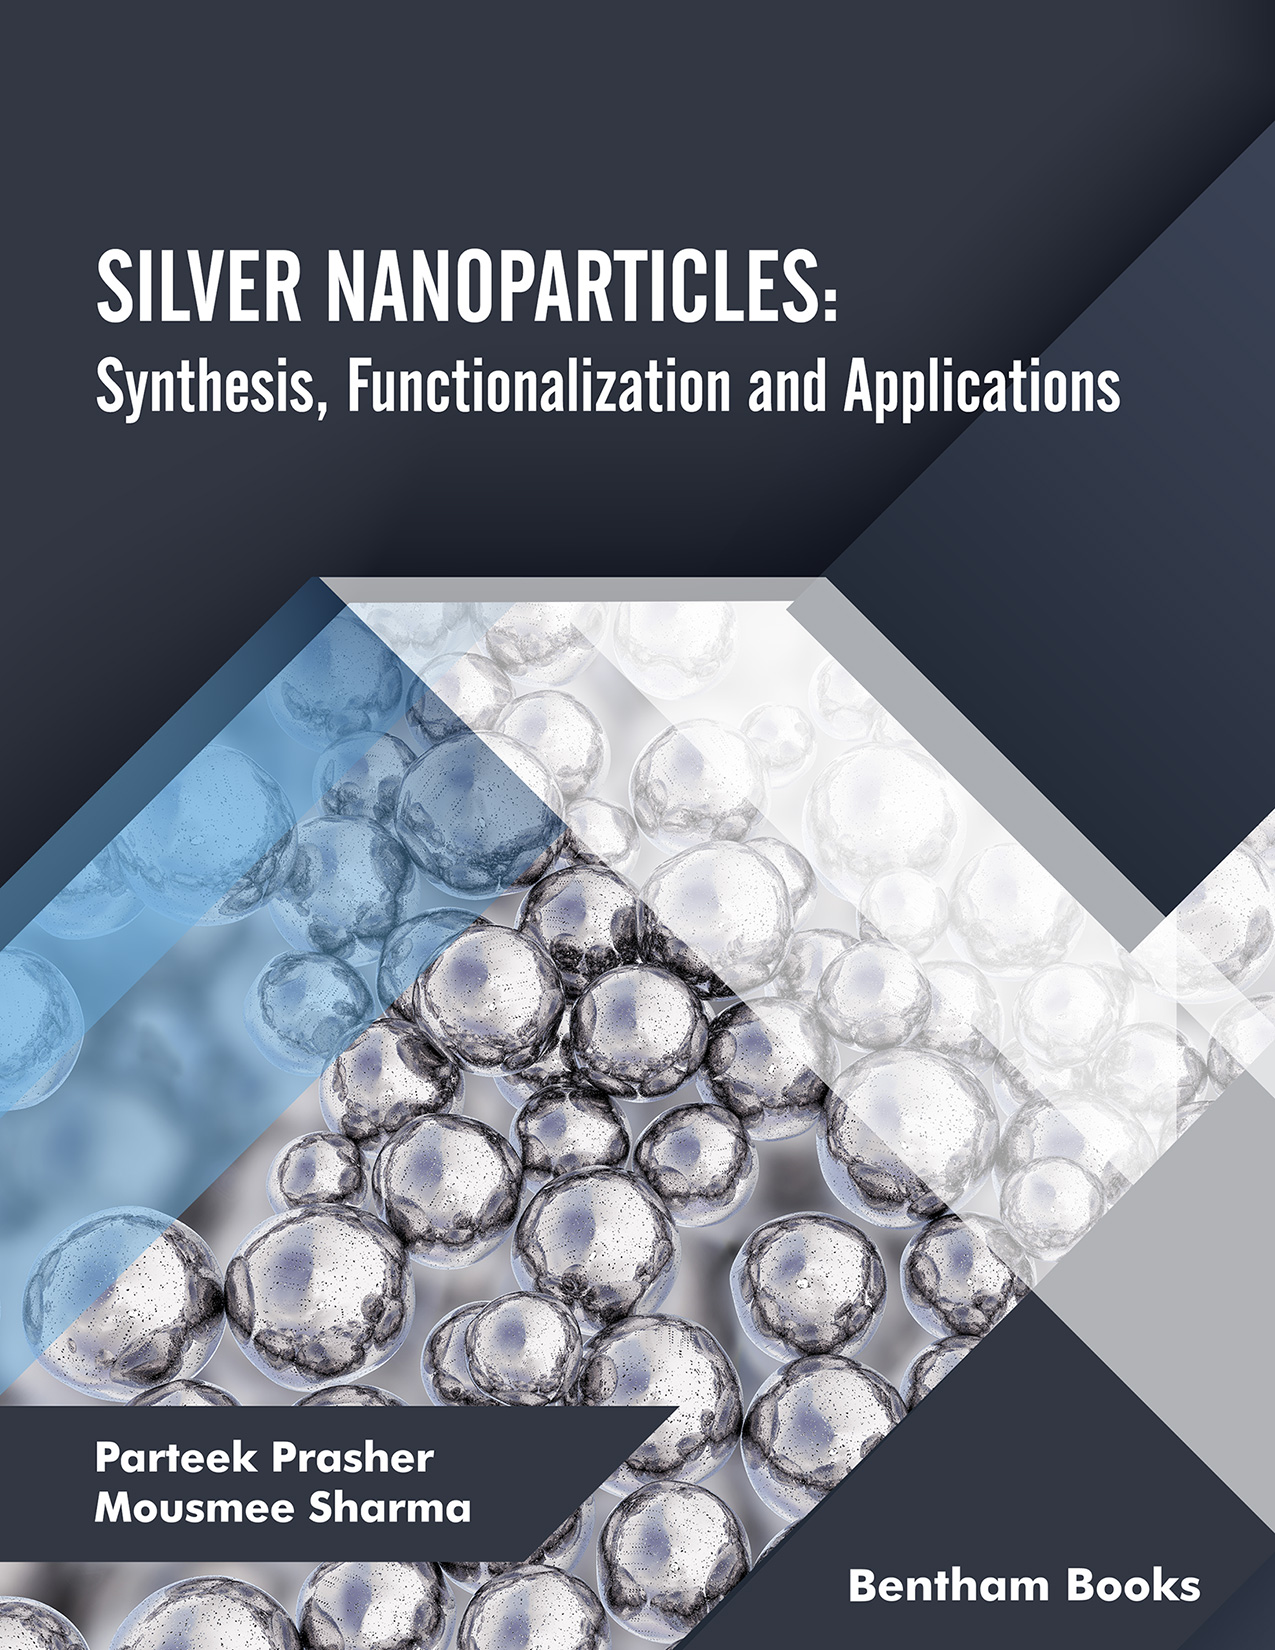 SILVER NANOPARTICLES: Synthesis, Functionalization and Applications